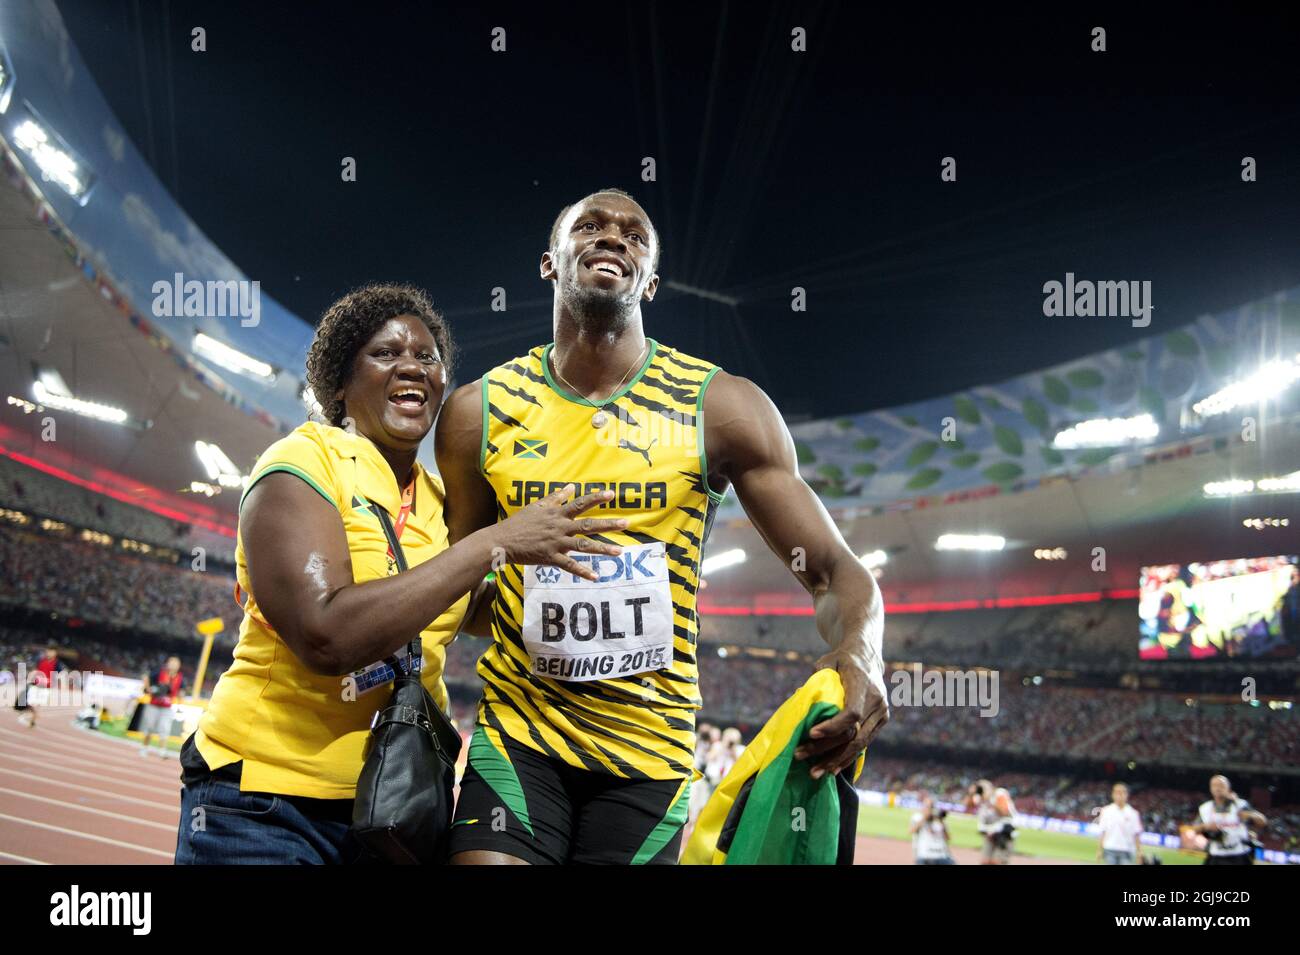 BEIJING 20150823 Usain Bolt of Jamaica gets a hug from his mother Jennifer Bolt after winning the men's 100m final during the Beijing 2015 IAAF World Championships at the National Stadium in Beijing, China, August 23, 2015. Photo: Jessica Gow / TT / Kod 10070  Stock Photo